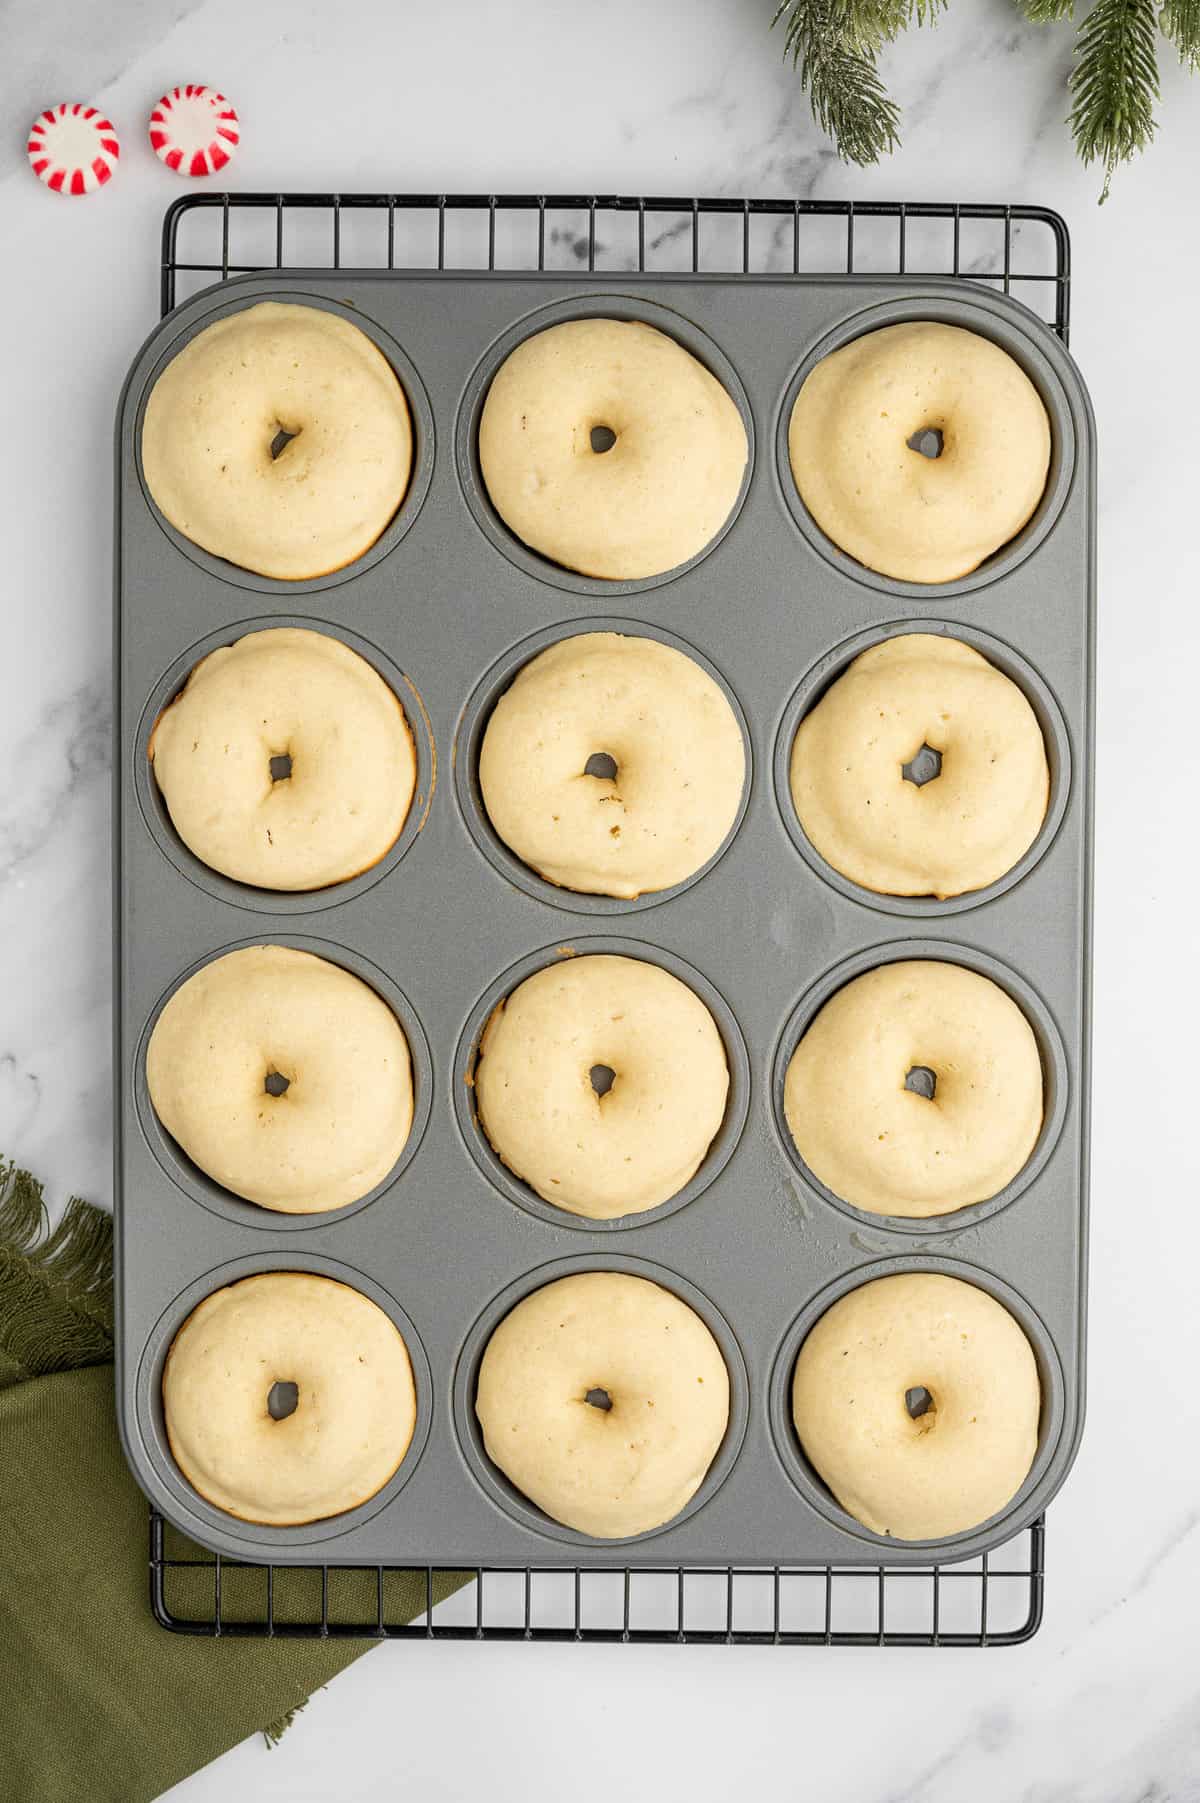 Baked donuts in donut pan.